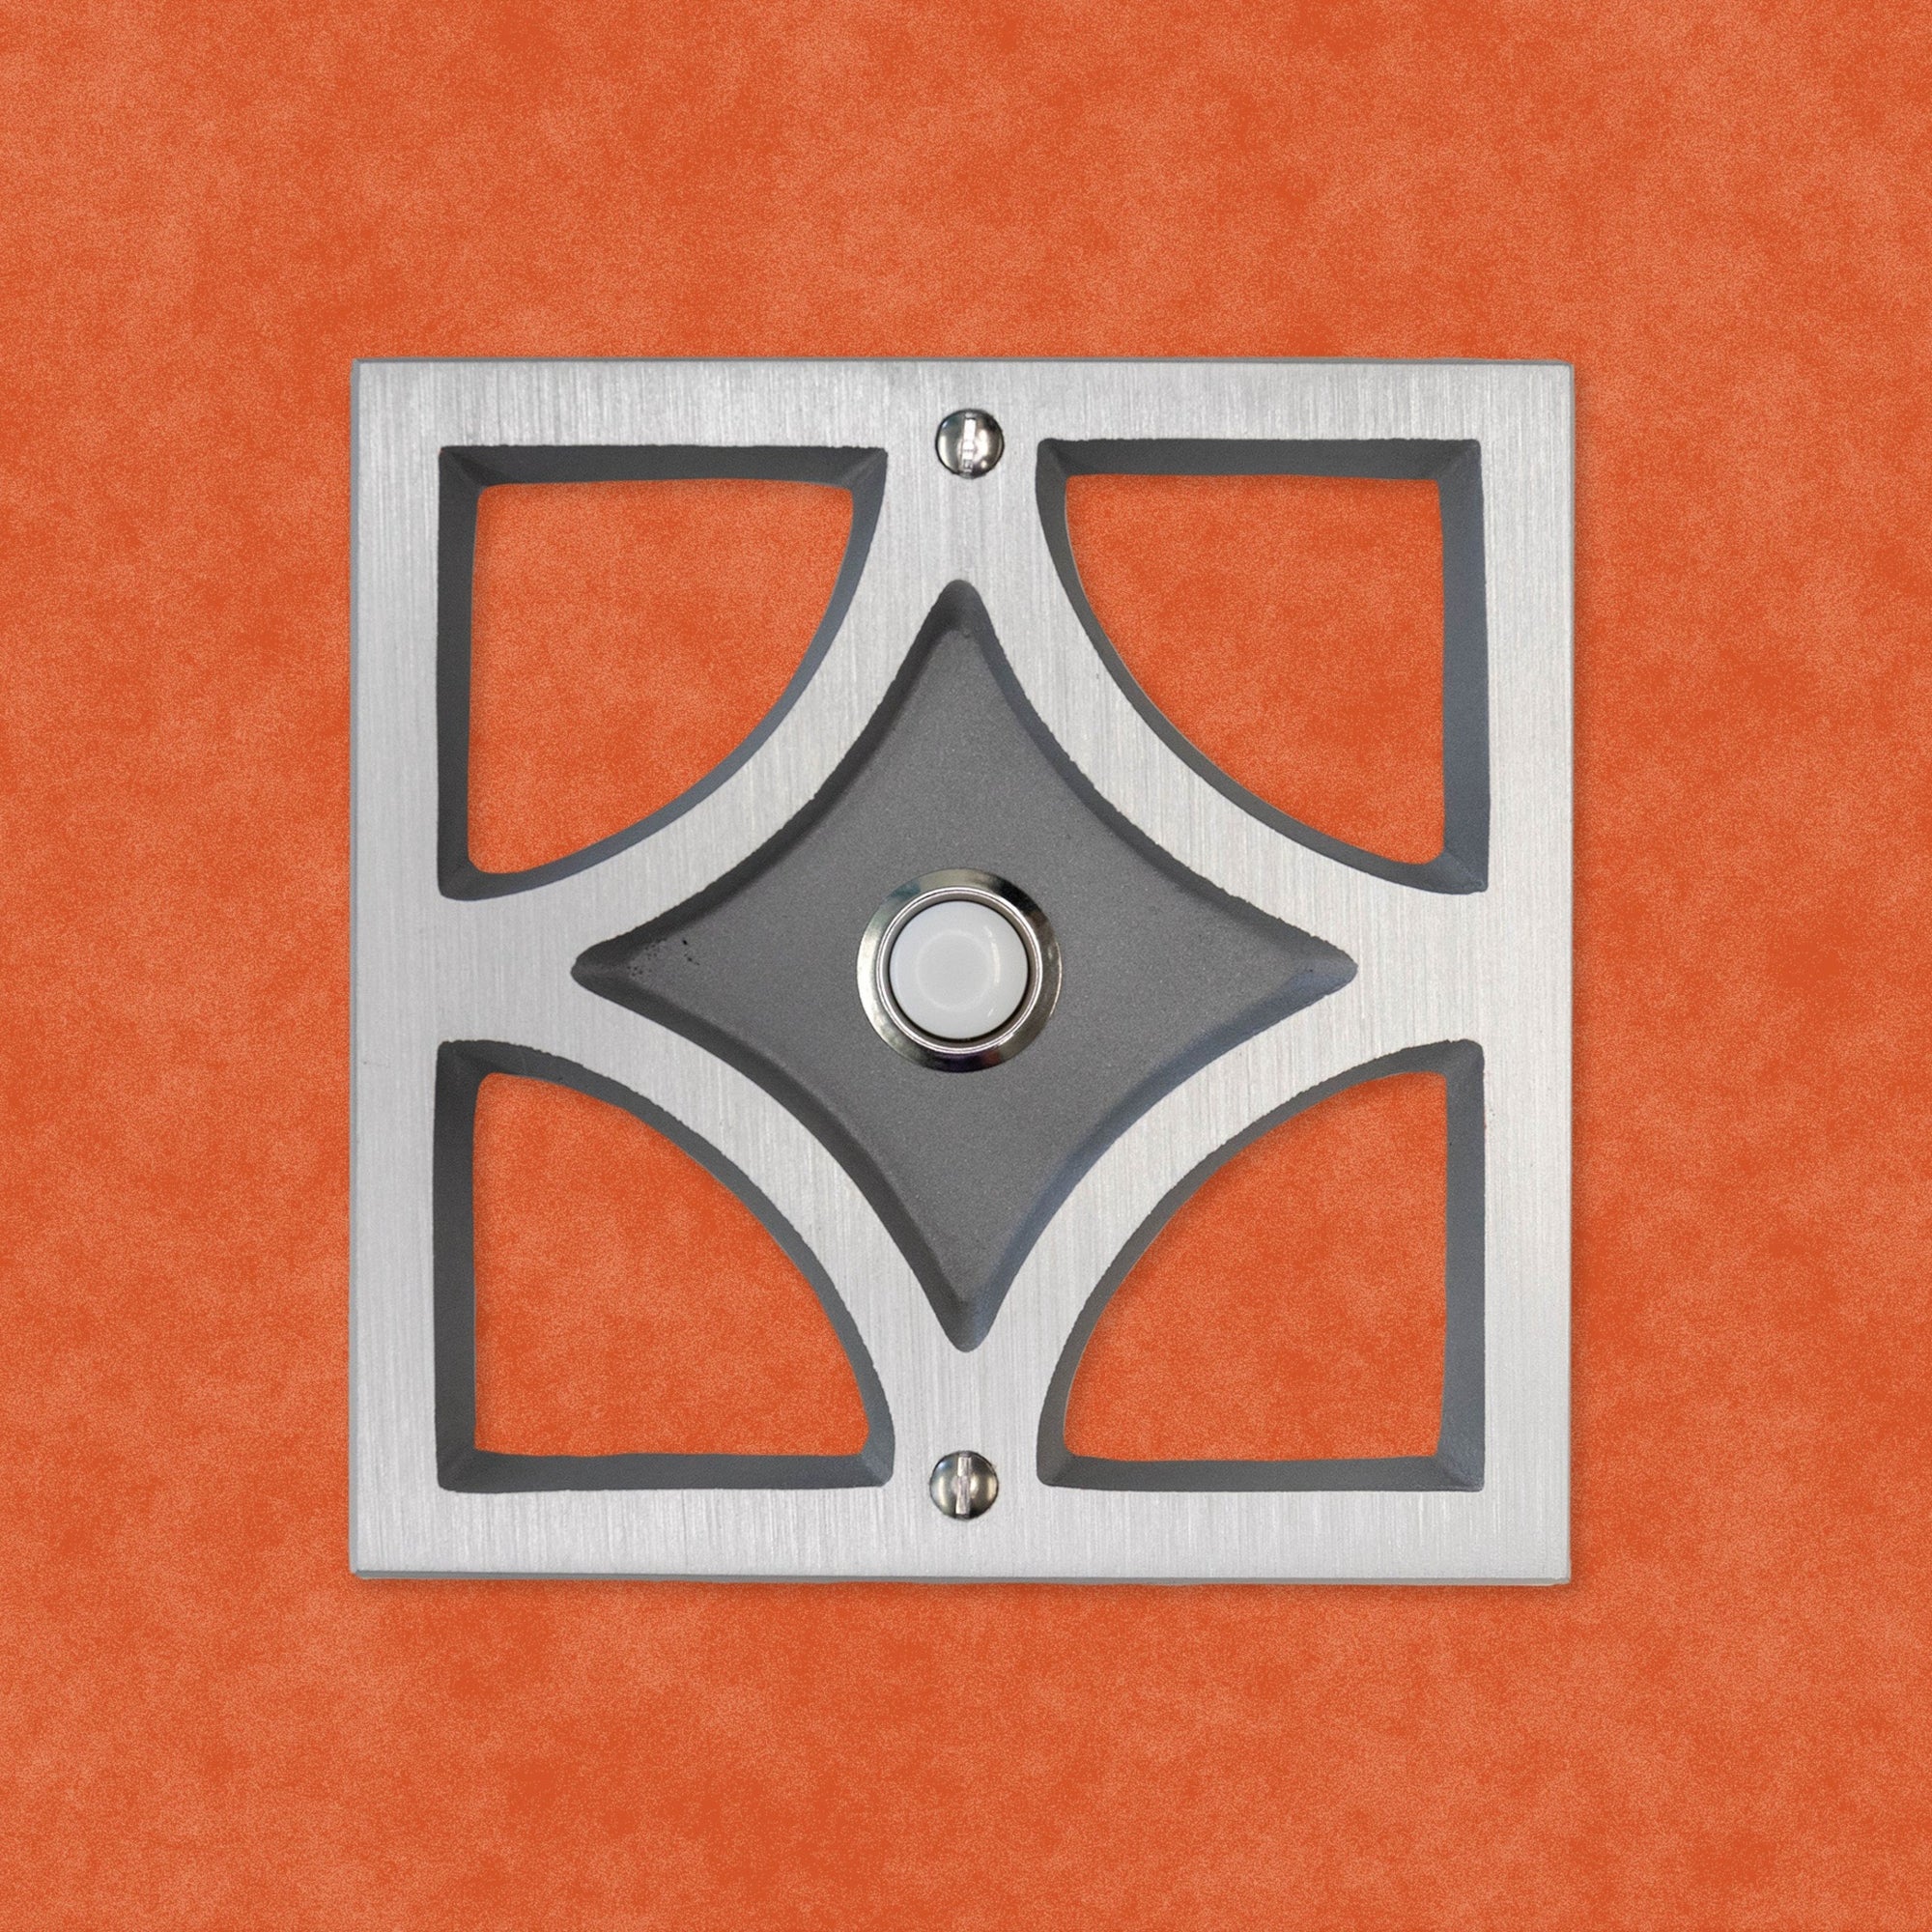 A natural cast aluminum breeze block with a silver rimmed door bell button and screws. The breeze block design is a square exterior with a diamond shape inside, leaving 4 hollow corners. The middle of the diamond is sunken in, and that is where the doorbell button is. On the inner areas and sunken middle diamond, it is natural cast aluminum, while the face is brushed aluminum to give it a brighter contrast.